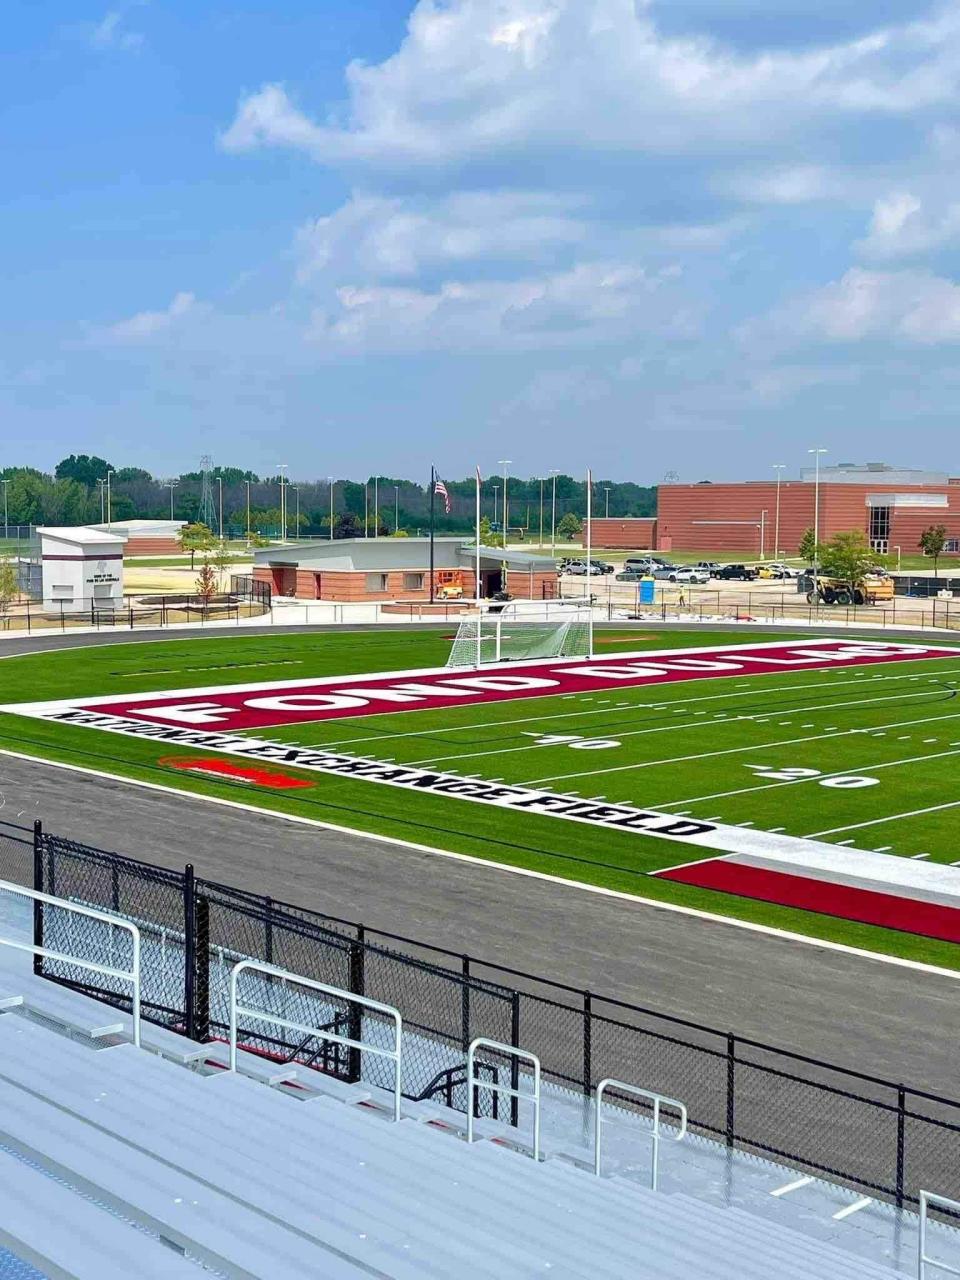 North endzone of the new Fond du Lac football field located on campus at Fond du Lac High School